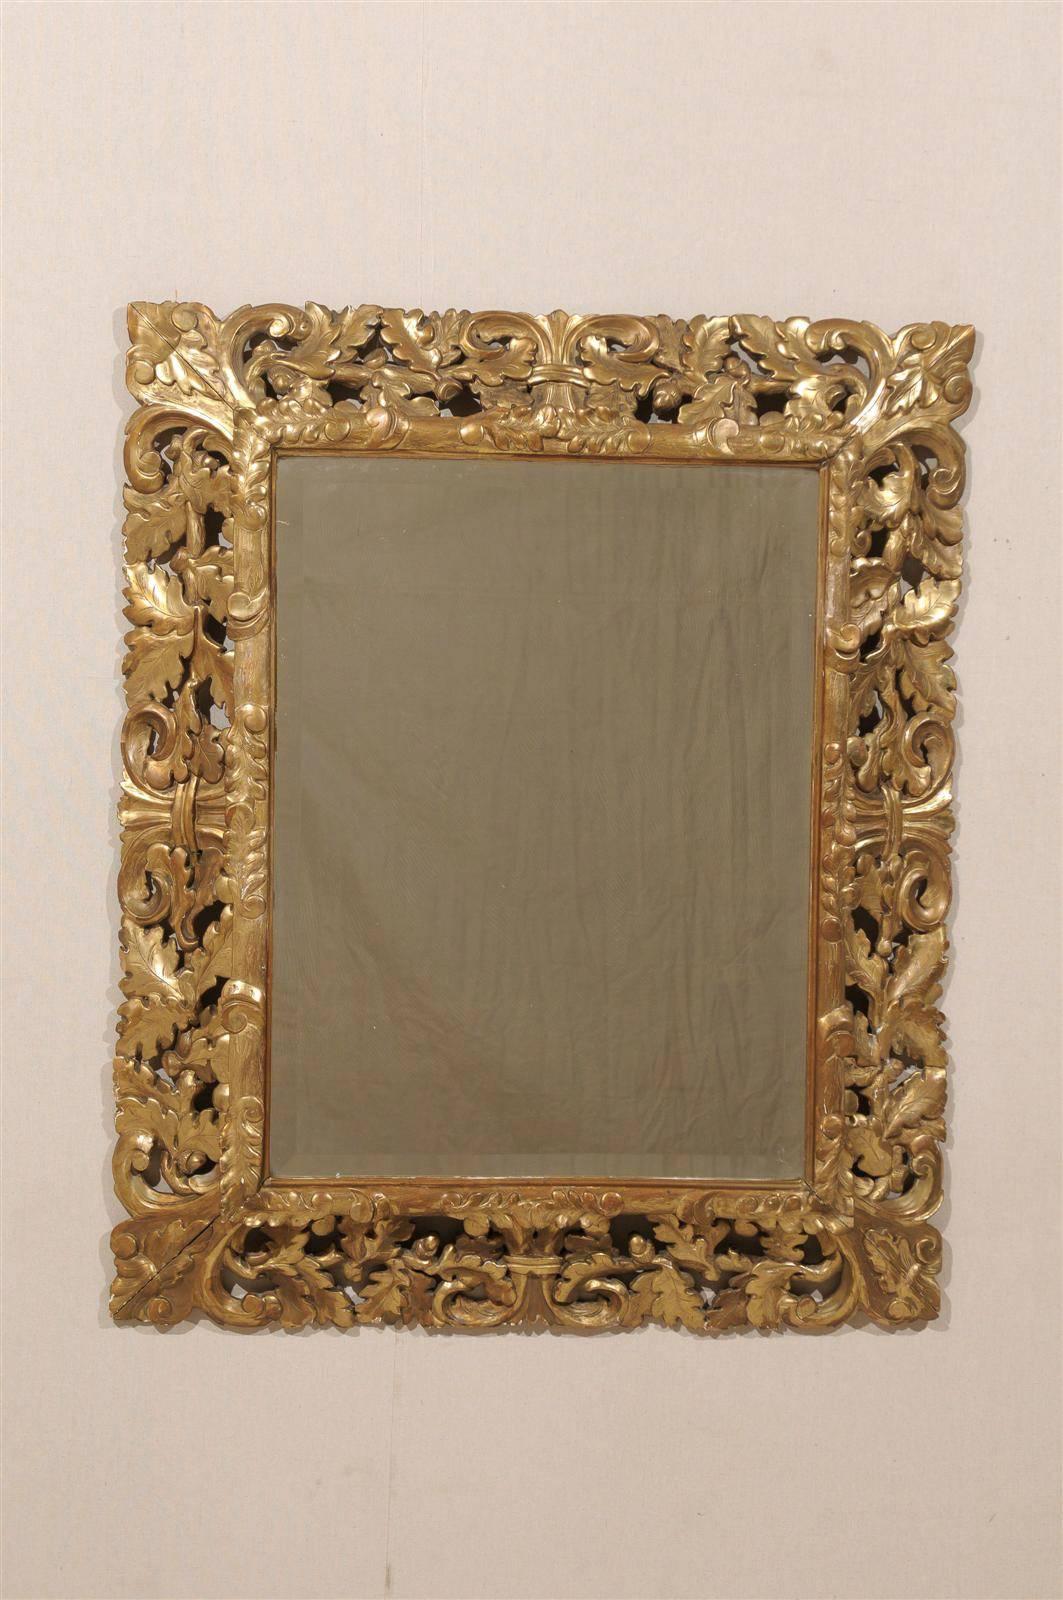 A French 19th century gilded mirror with beveled glass and floral motifs in the surround, including oak leaves, acorns and central motifs somewhat reminiscent of a stylized fleur-de-lys.